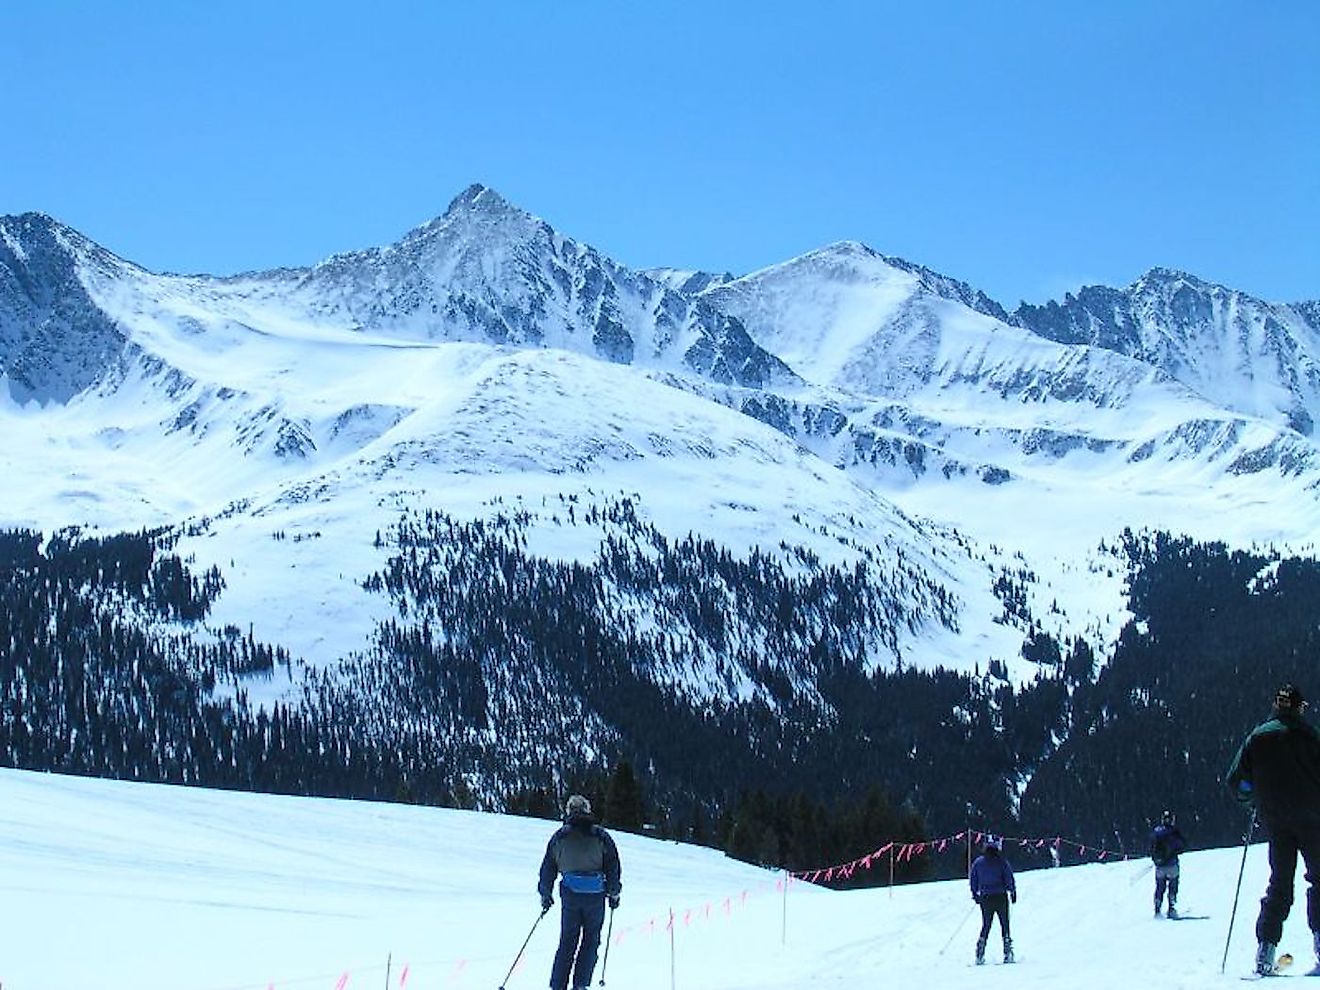 Skiing on the Copper Mountain. Image credit: Luis Toro/Flickr.com